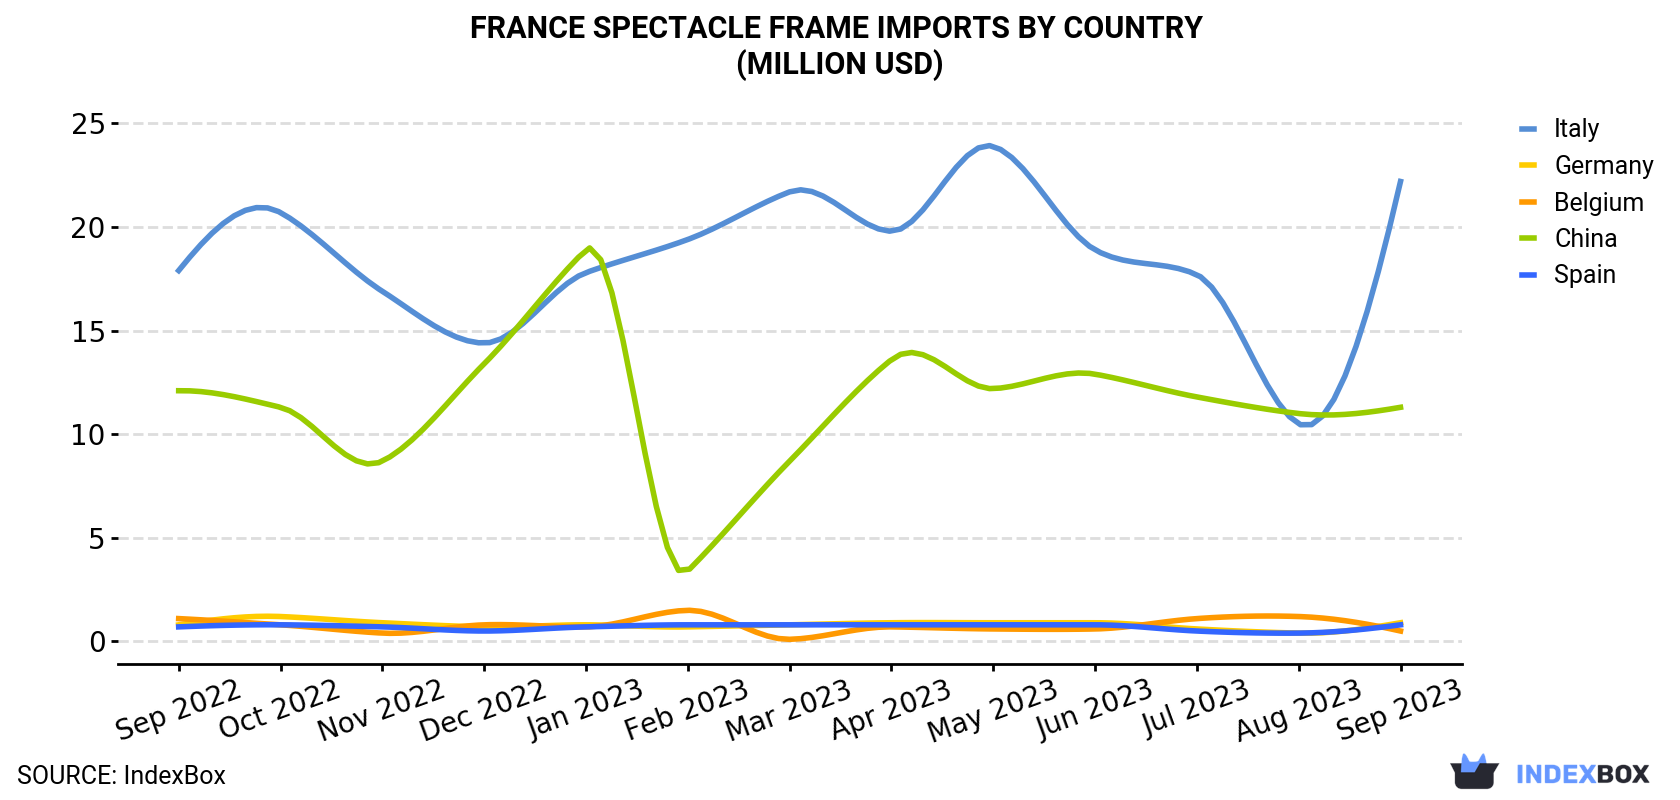 France Spectacle Frame Imports By Country (Million USD)